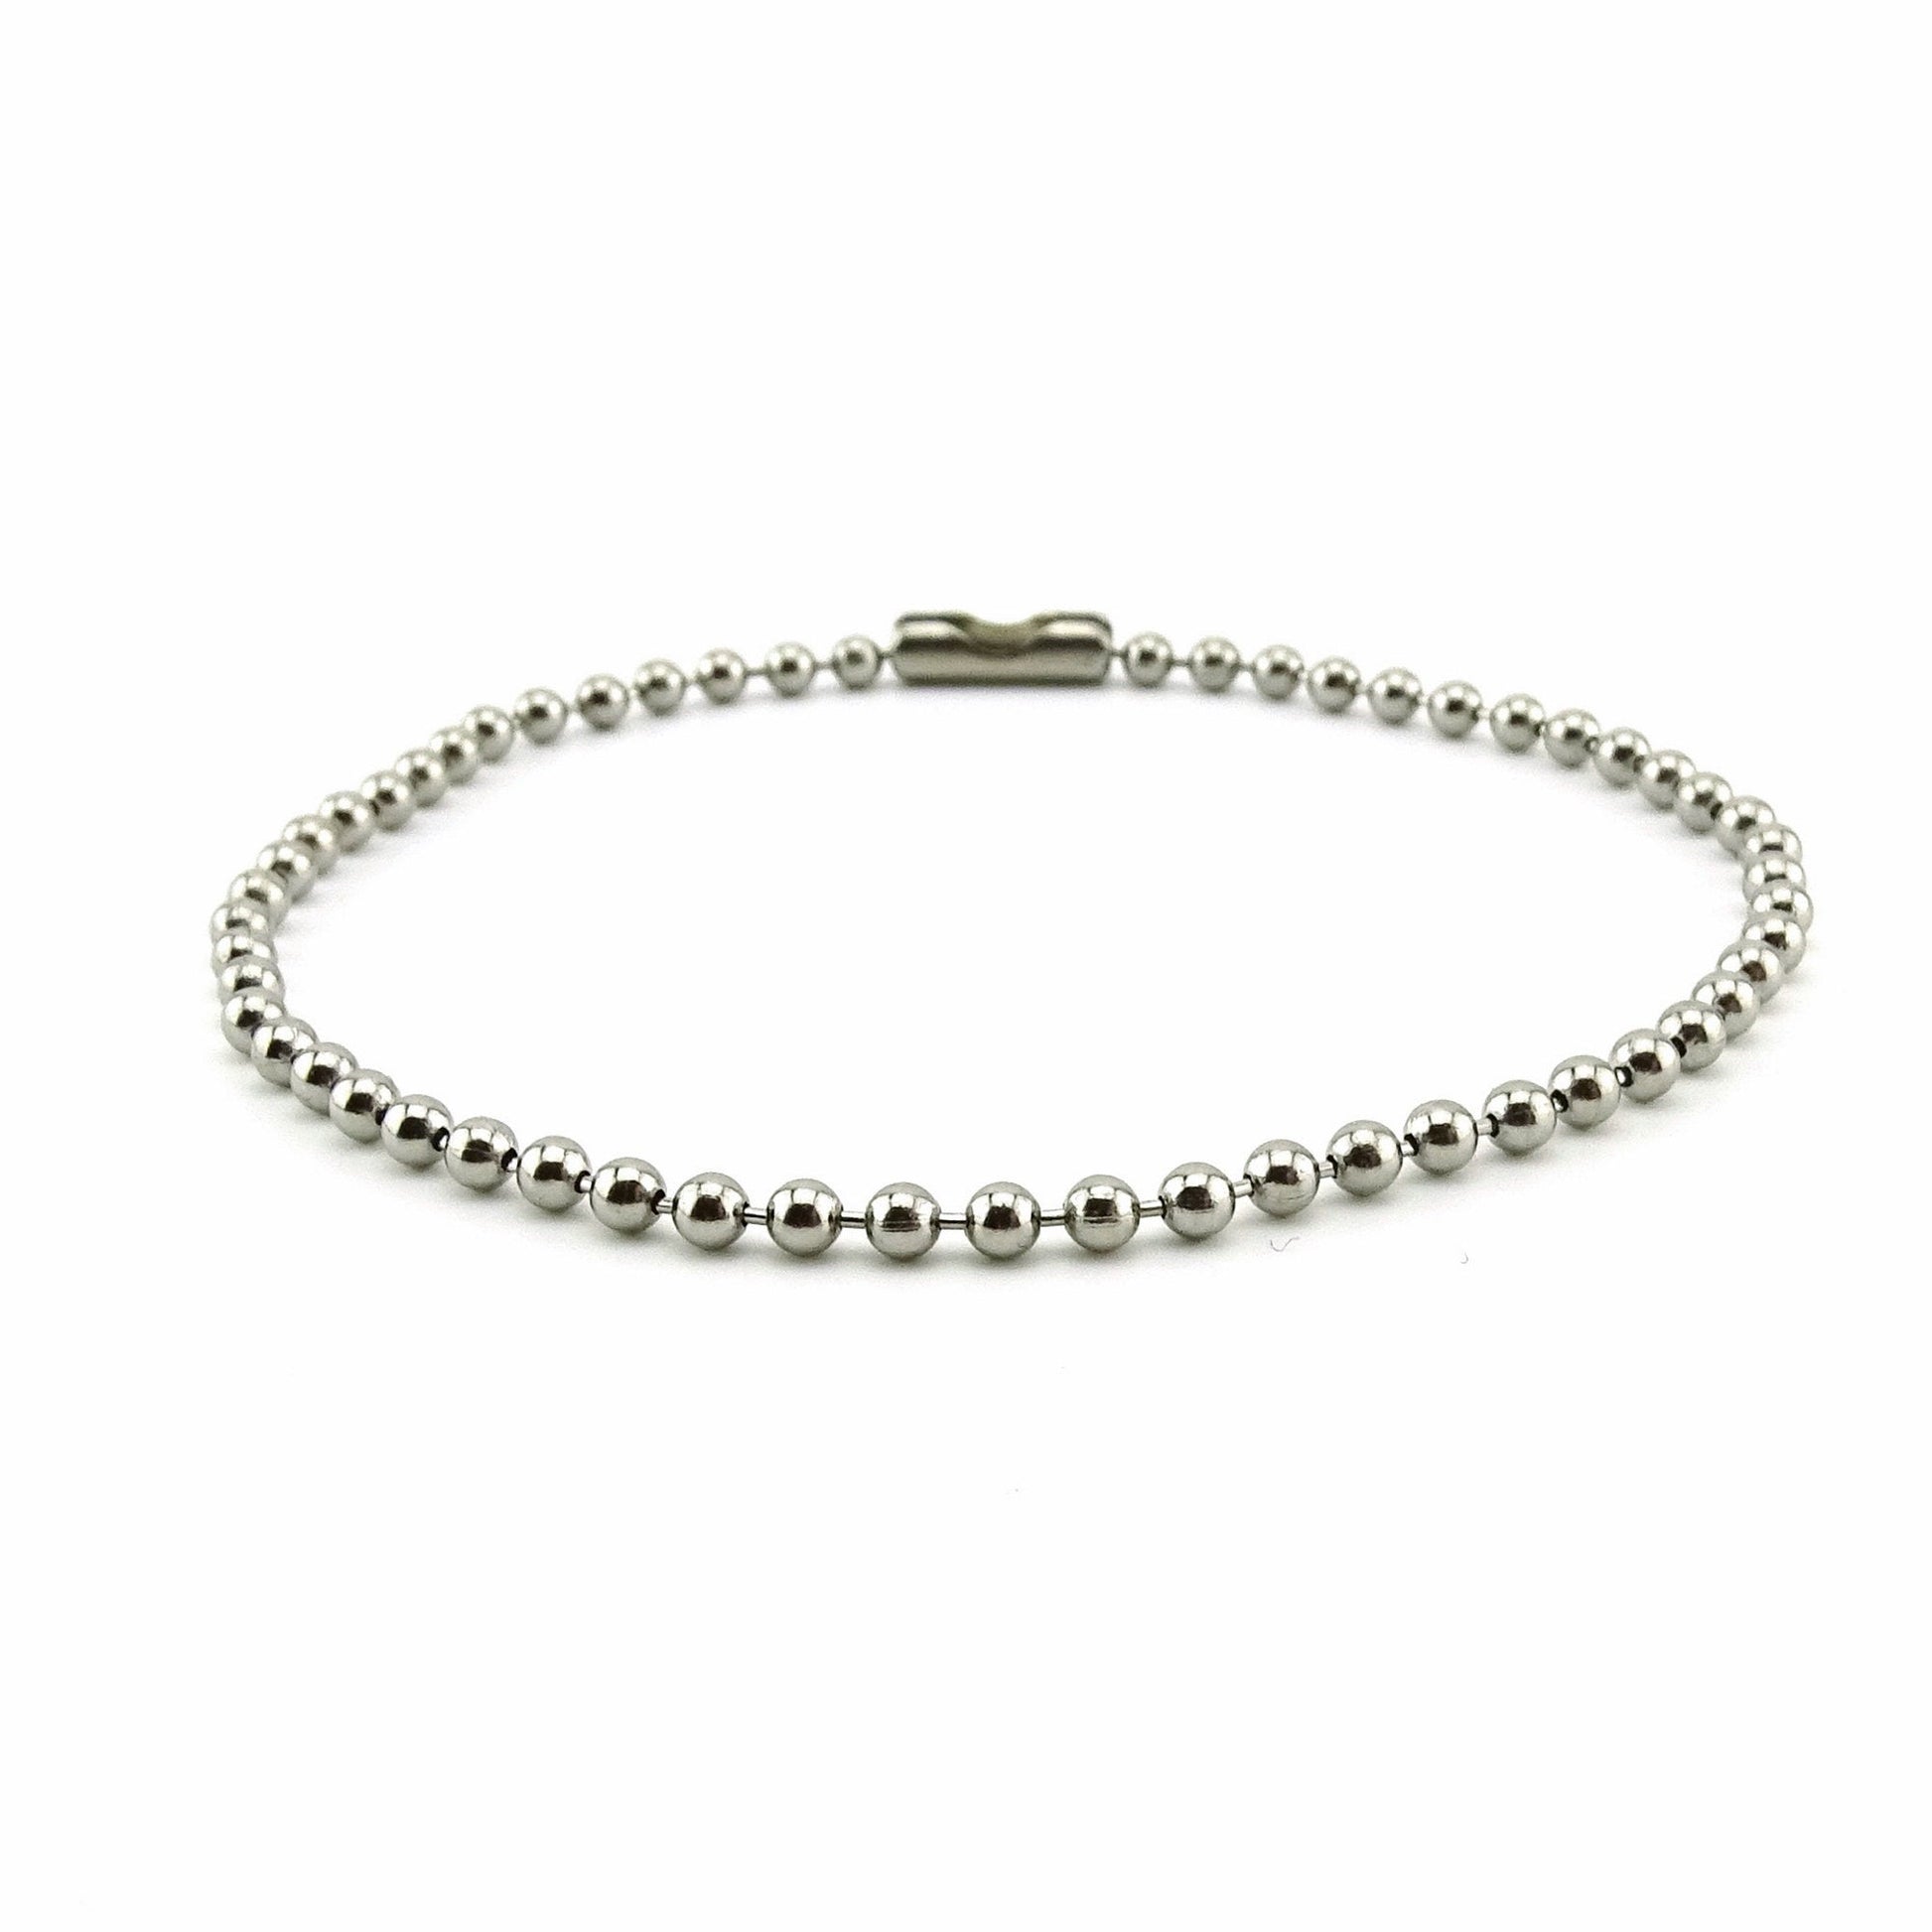 Amazon.com: Savlano 925 Sterling Silver Oval Rice Bead Strand Chain Bracelet  For Women & Girls - Made in Italy Comes With a Gift Box (7, 1.8mm):  Clothing, Shoes & Jewelry